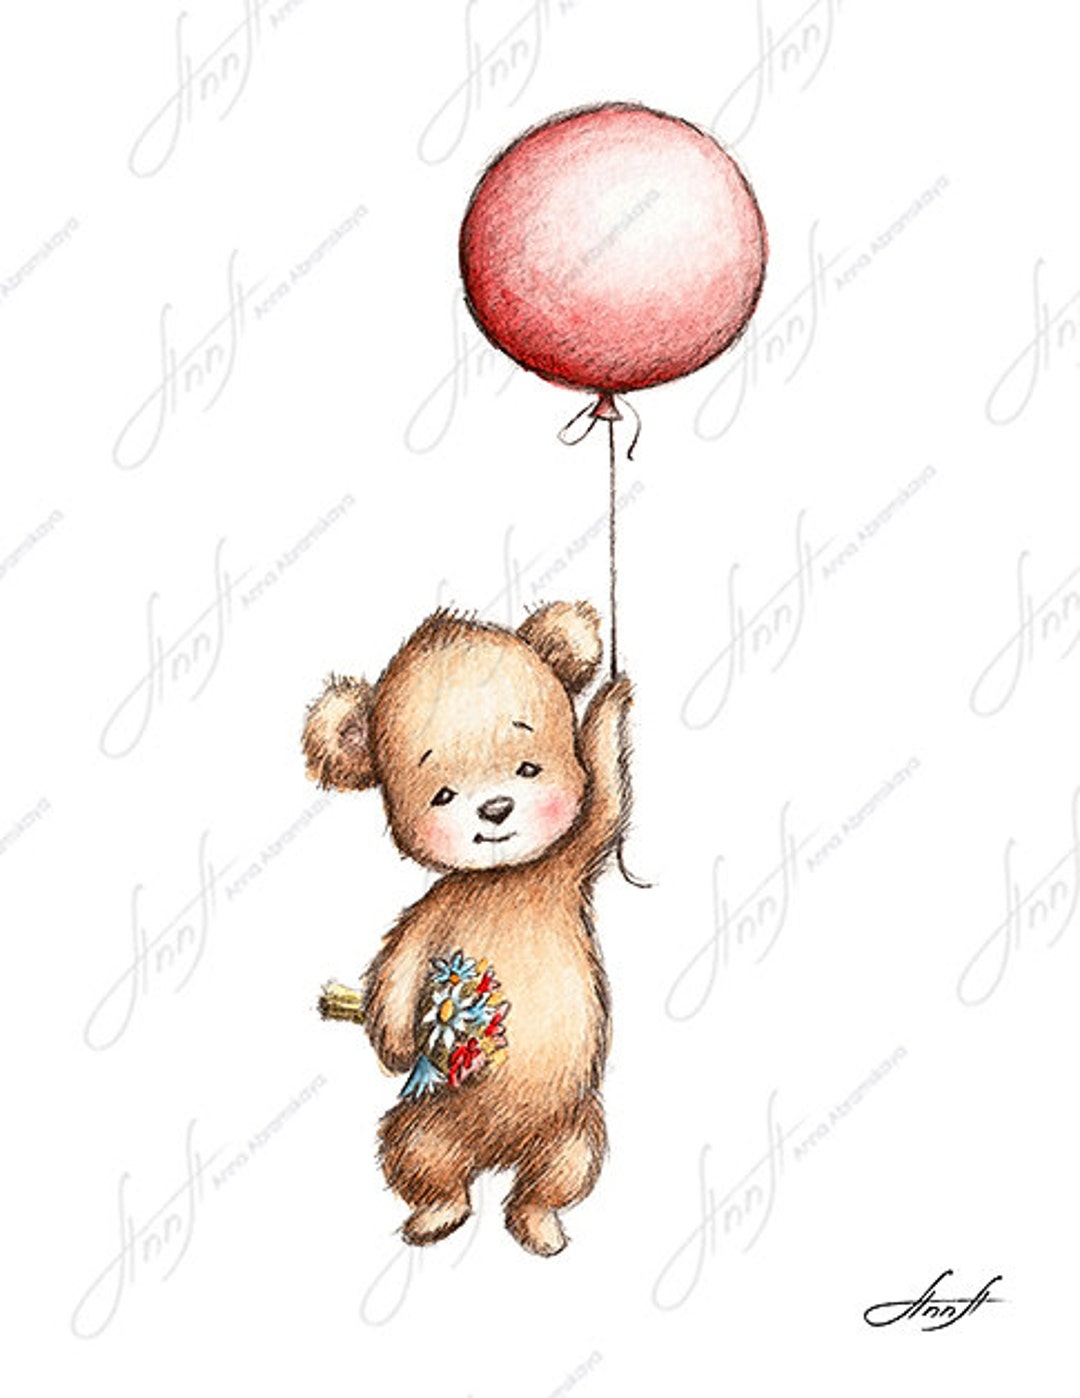 Balloon Drawing Stock Photos and Images  123RF